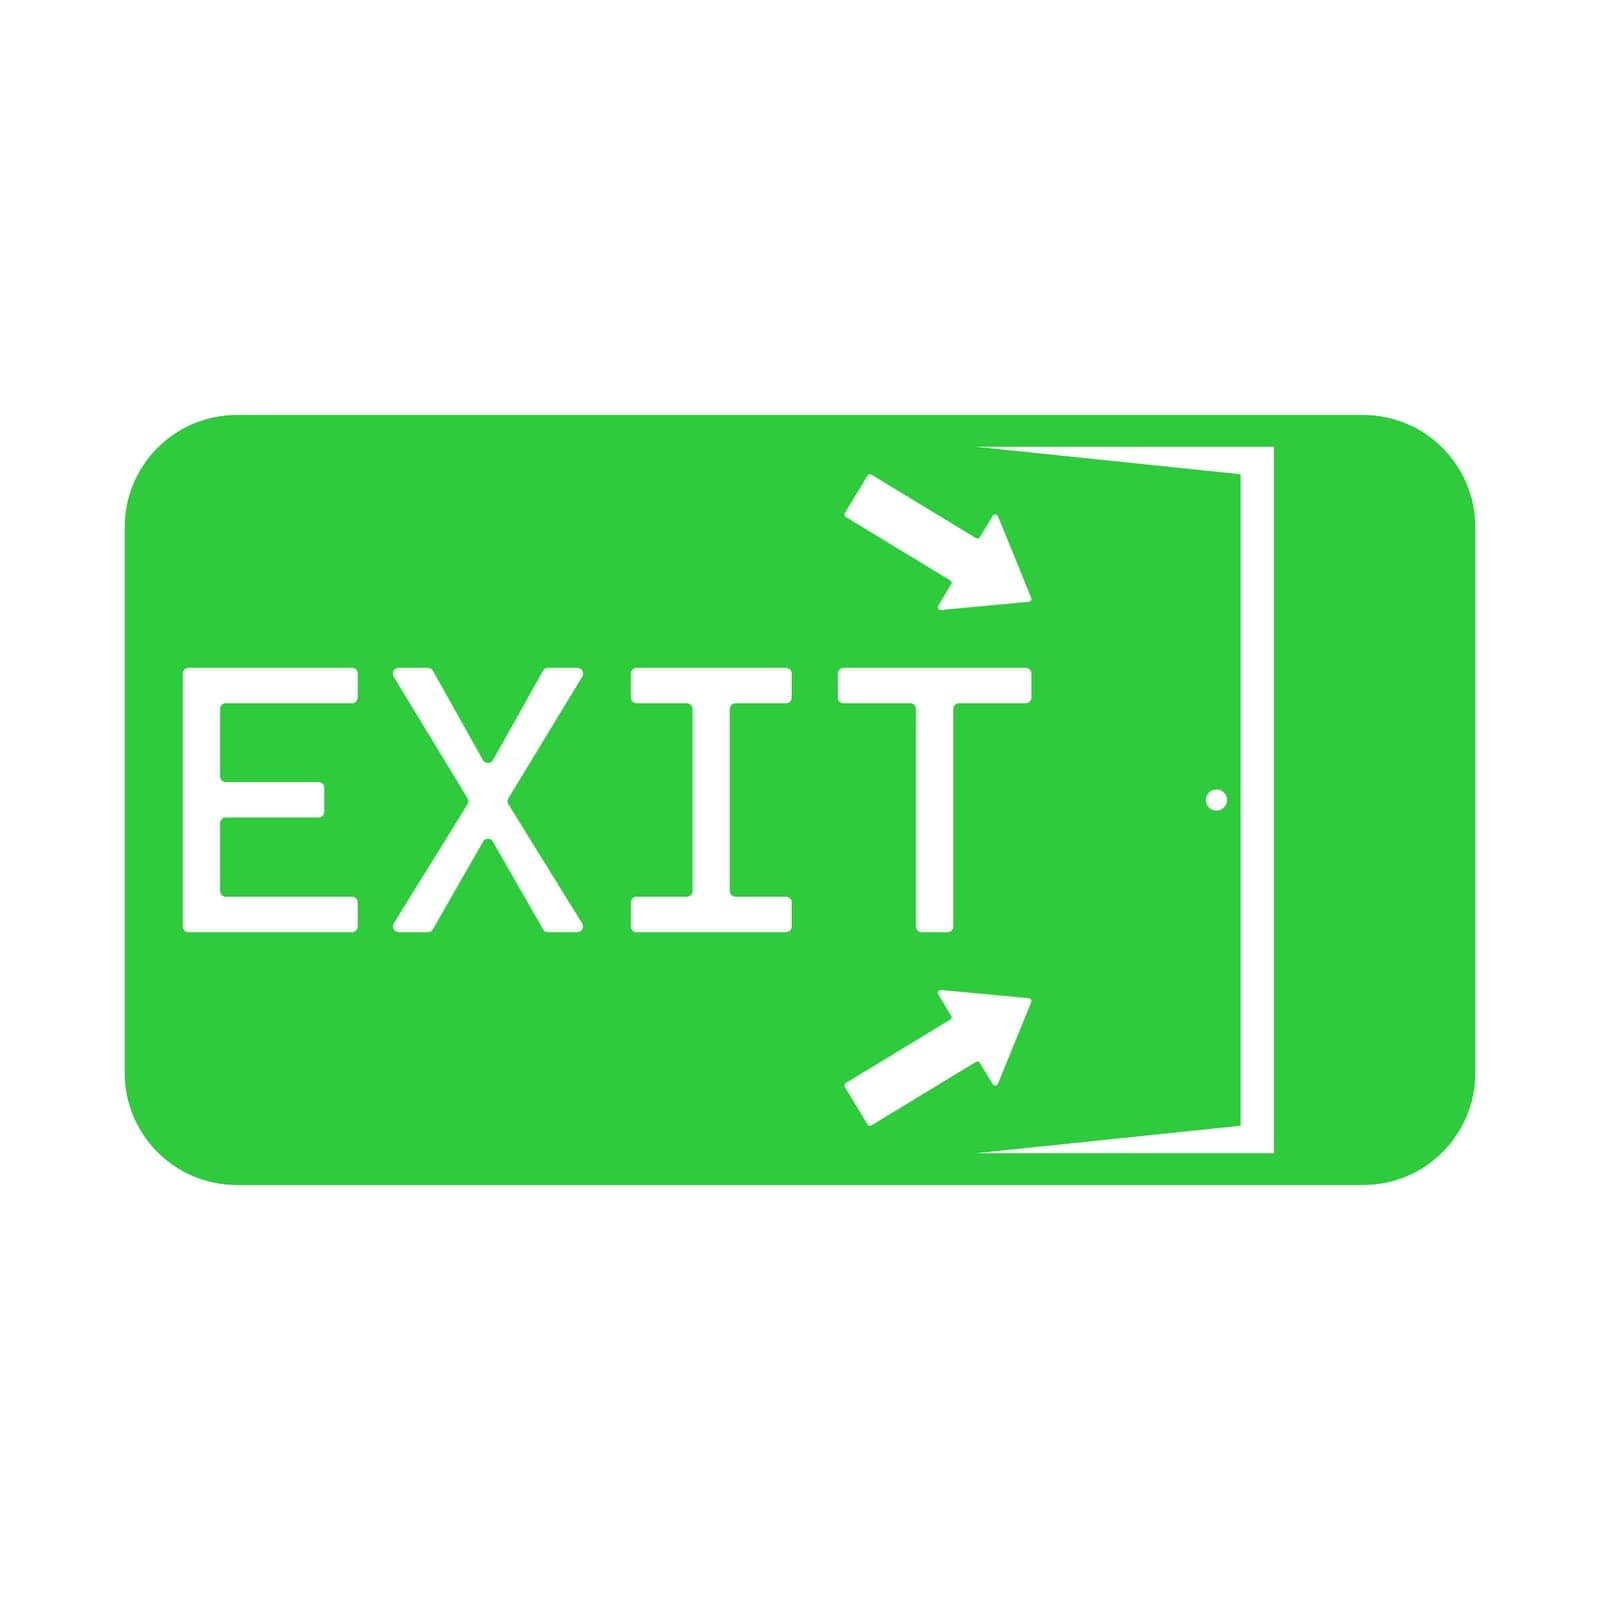 Emergency exit vector icon. Icon of arrows pointing to the exit and the green door. Evacuation exit icon. by Moreidea